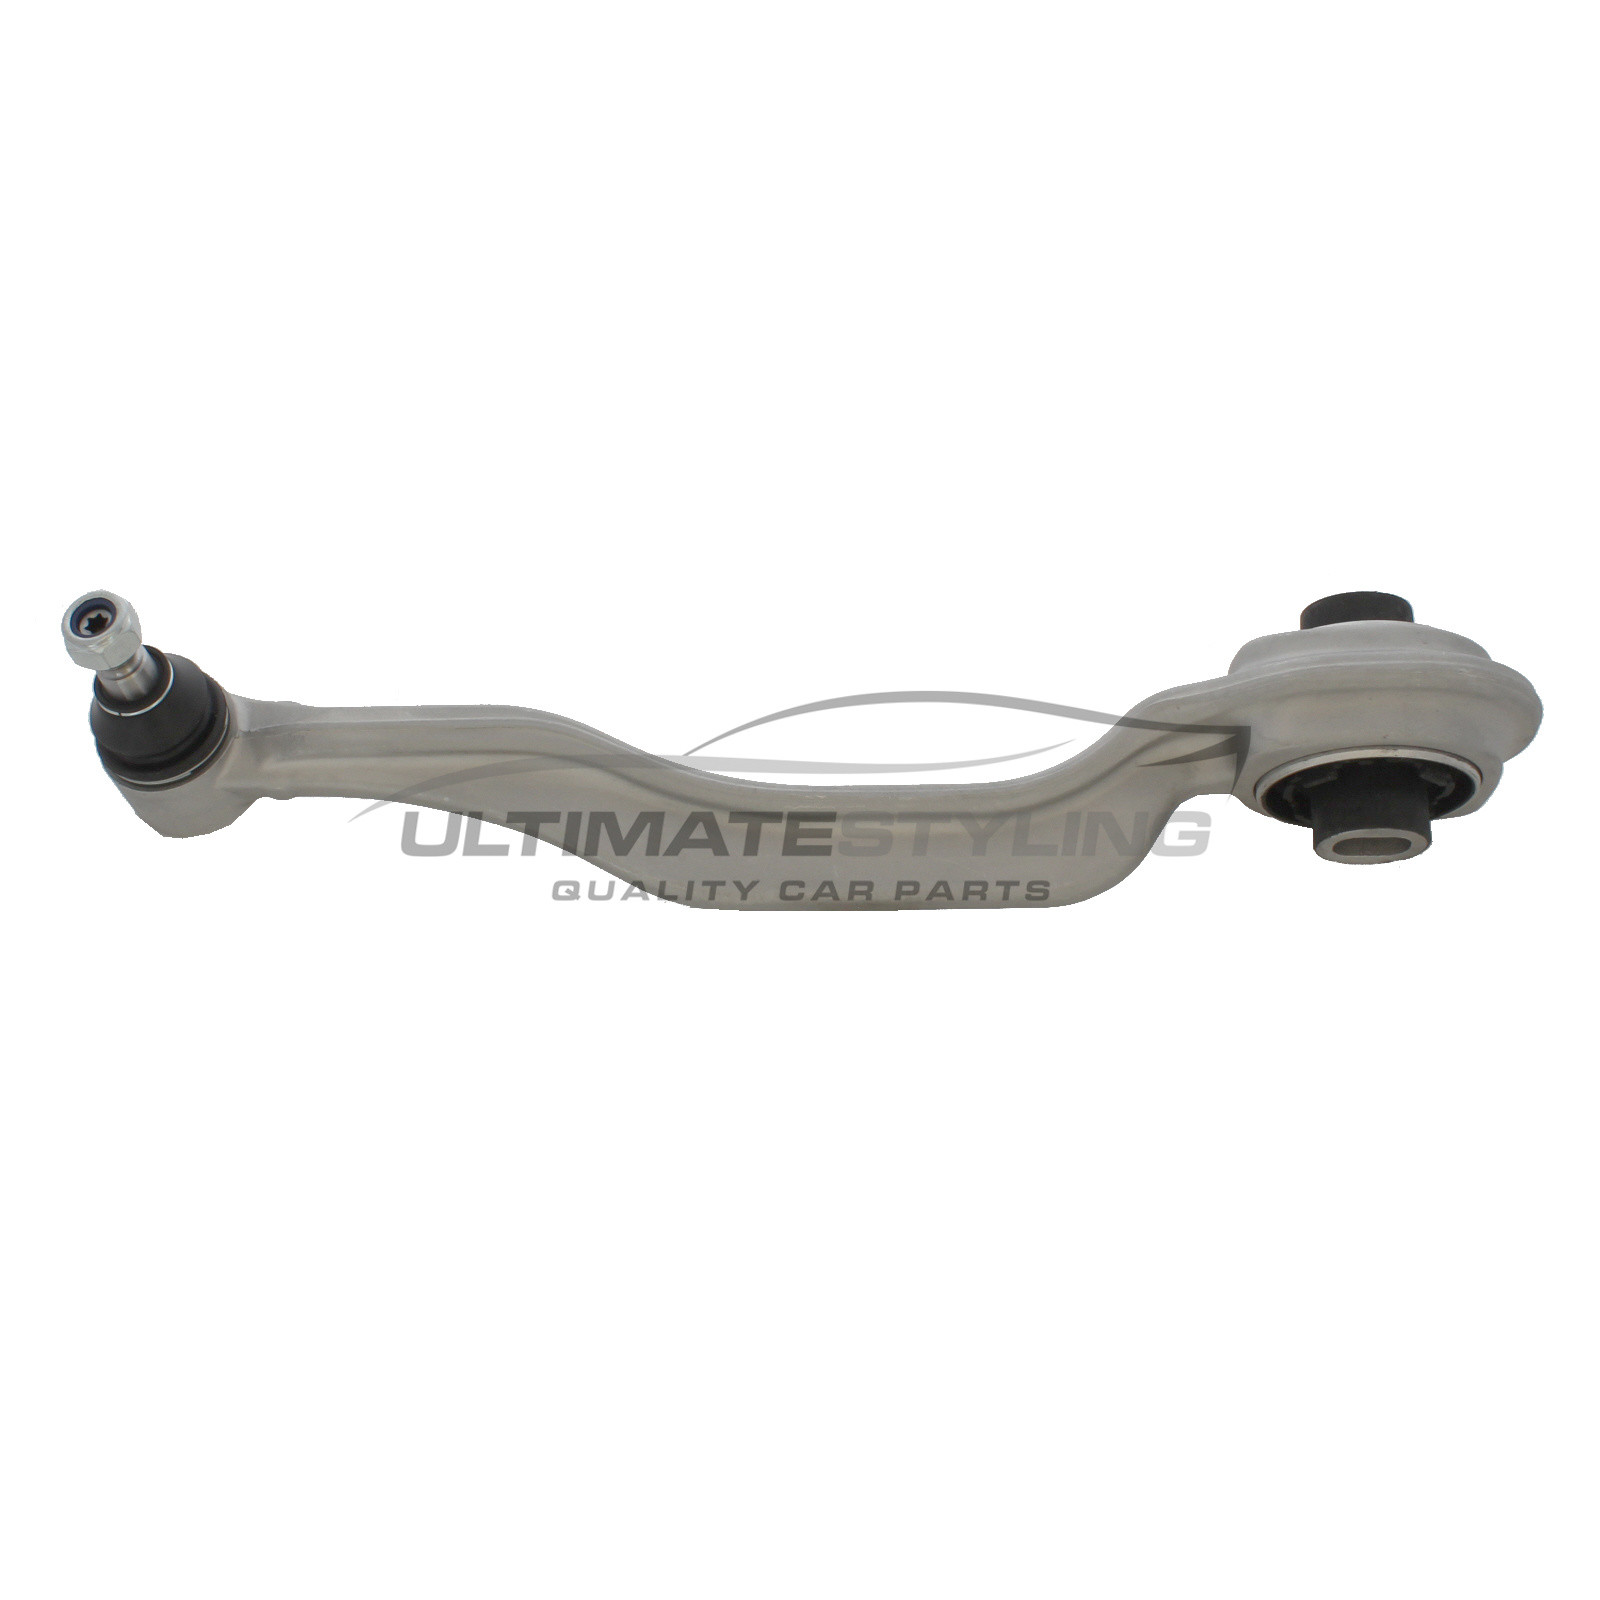 Mercedes Benz CLS Class 2005-2010, Mercedes Benz E Class 2002-2010, Mercedes Benz SL Class 2002-2013 Front Lower Suspension Arm (Alloy) Including Ball Joint and Rear Bush (Front of Wheel) Driver Side (RH)